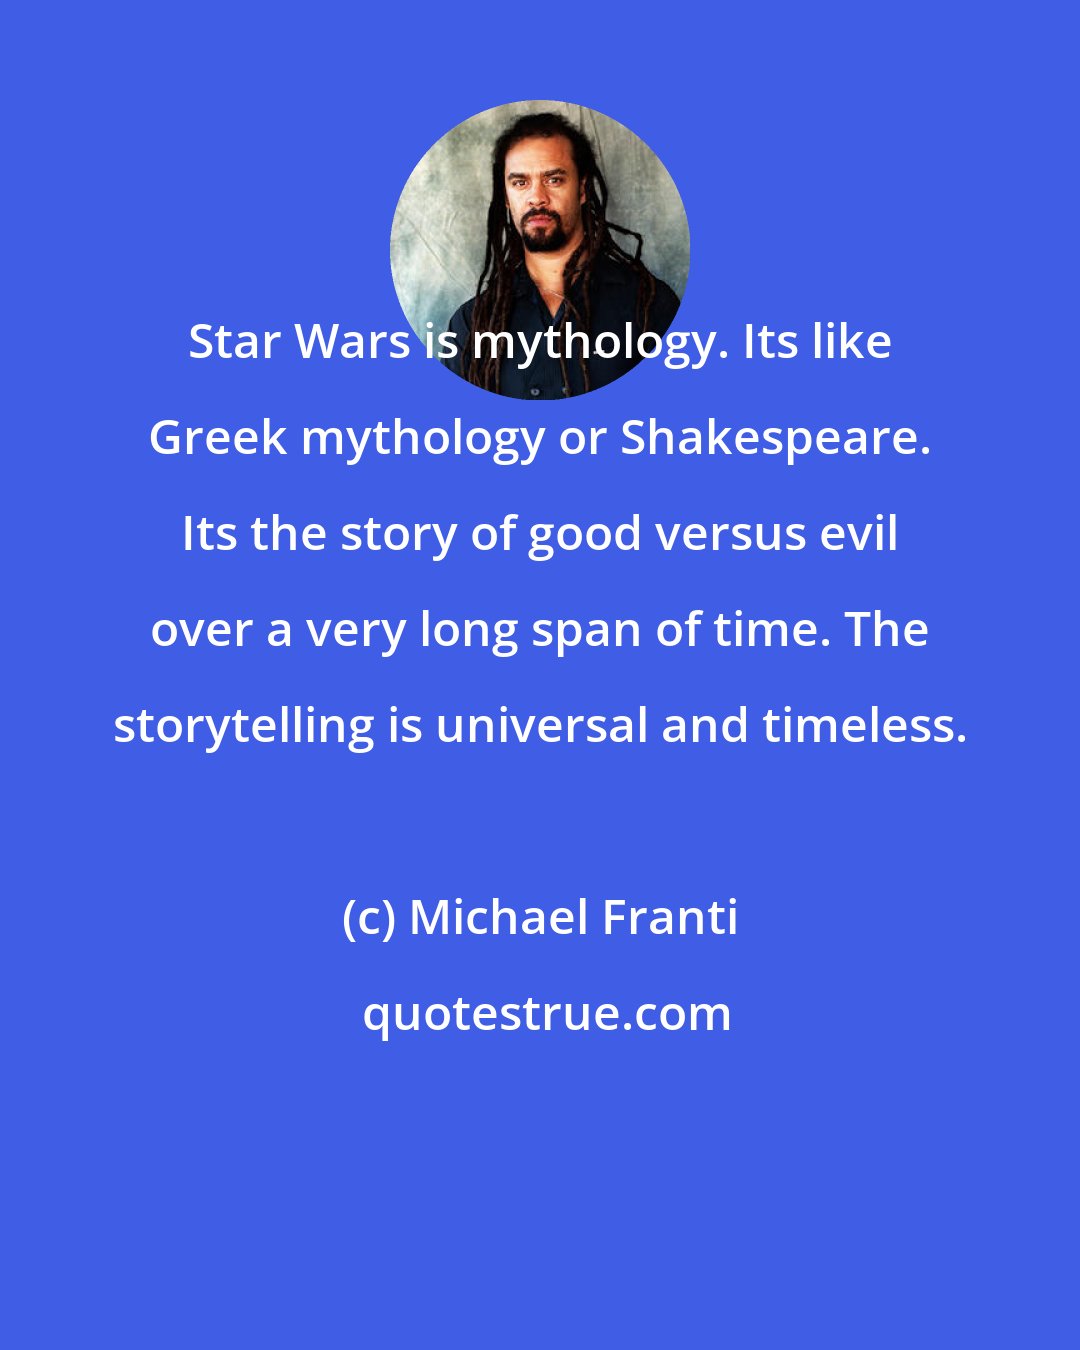 Michael Franti: Star Wars is mythology. Its like Greek mythology or Shakespeare. Its the story of good versus evil over a very long span of time. The storytelling is universal and timeless.